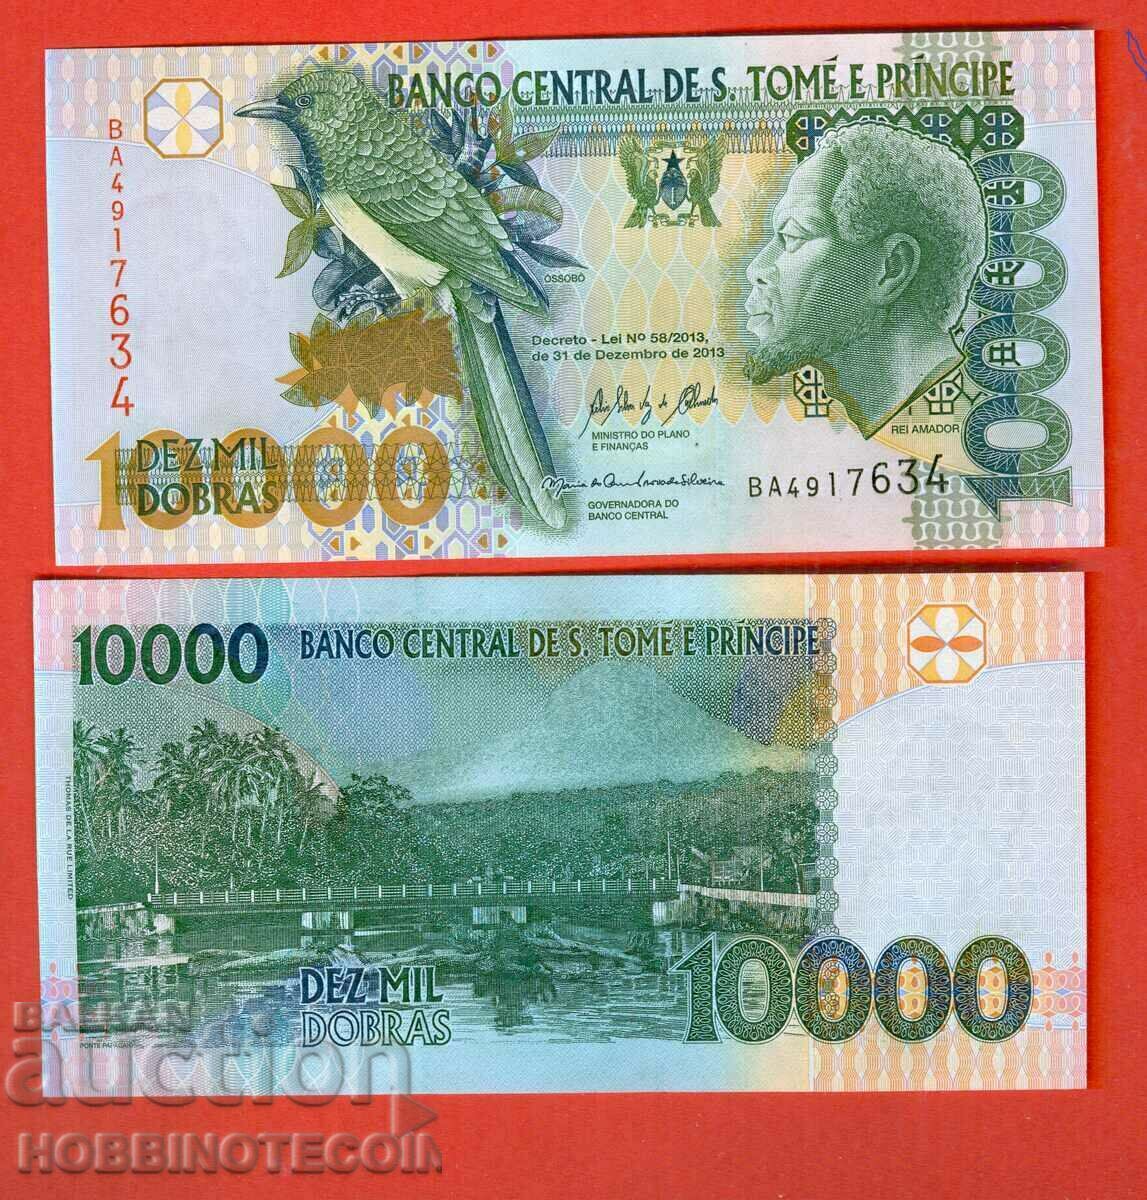 SAO TOME AND PRINCIPE 1000 10,000 issue issue 2013 NEW UNC